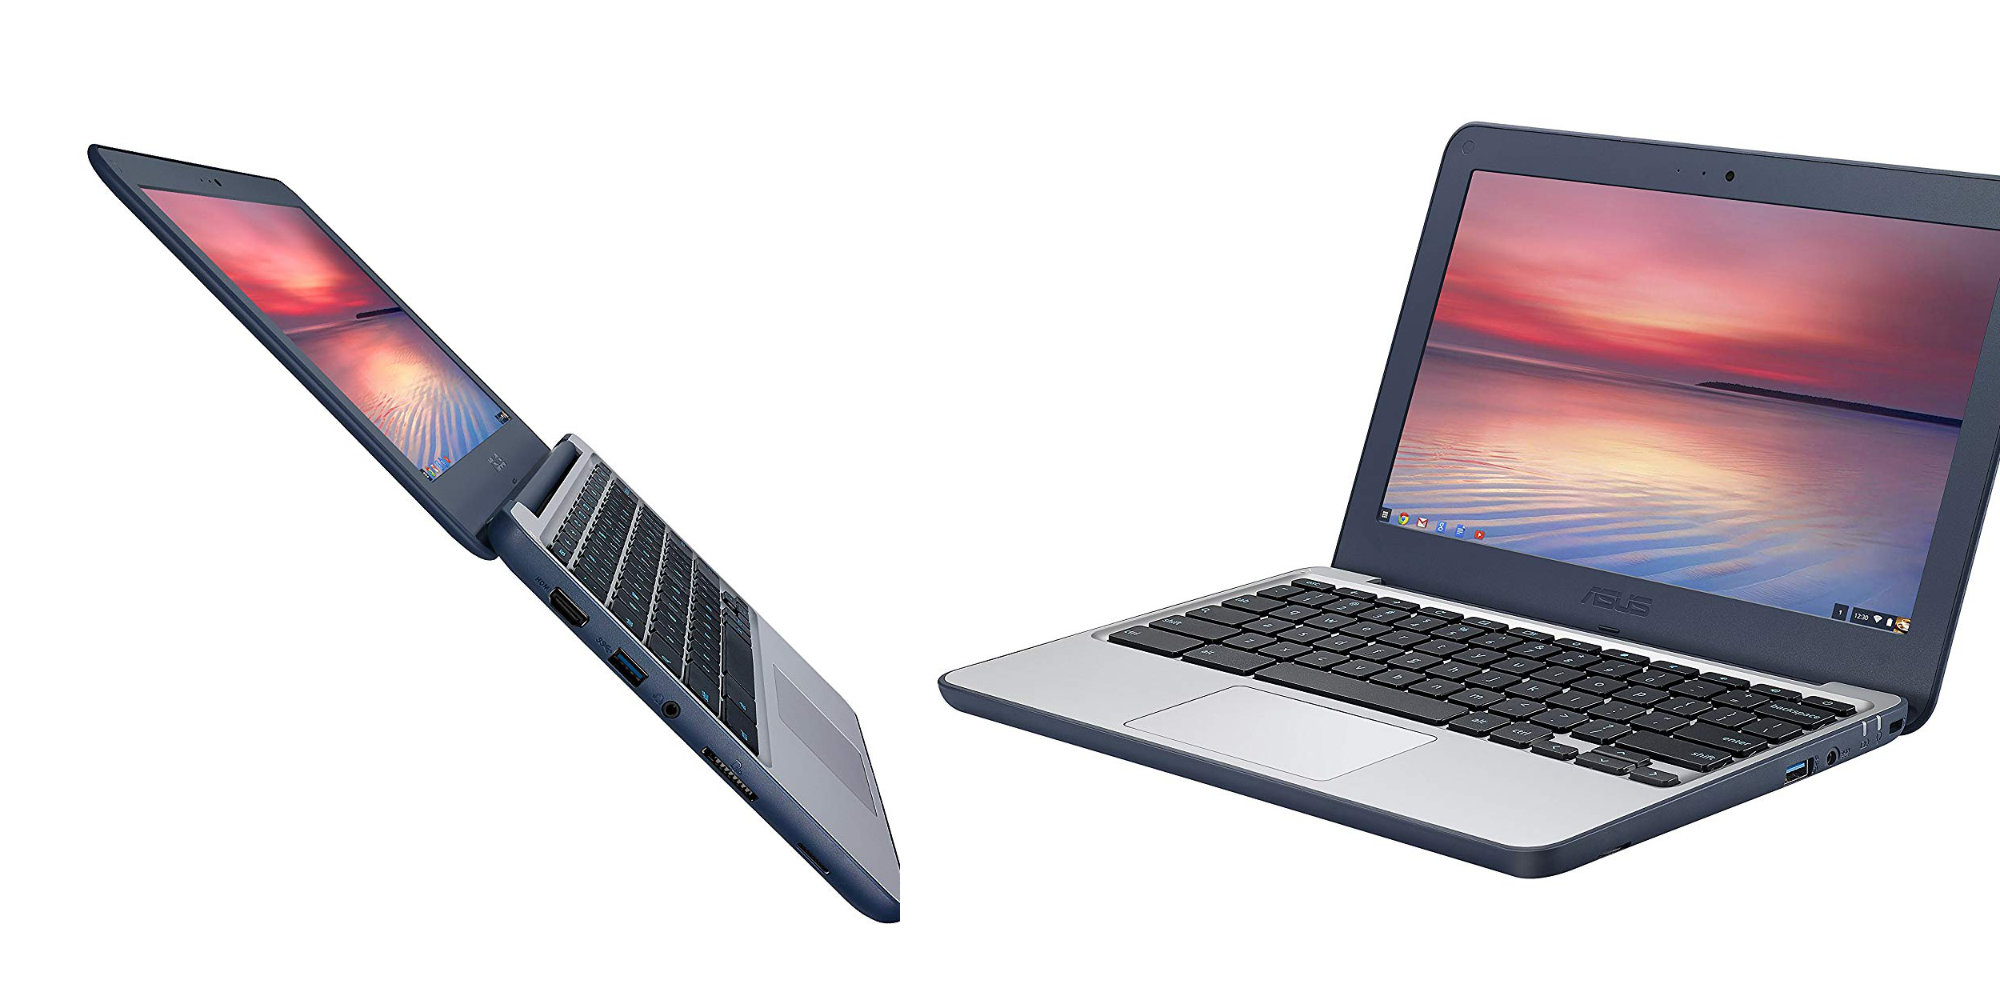 This Asus Chromebook packs an 11.6" screen and spill-resistant keyboard